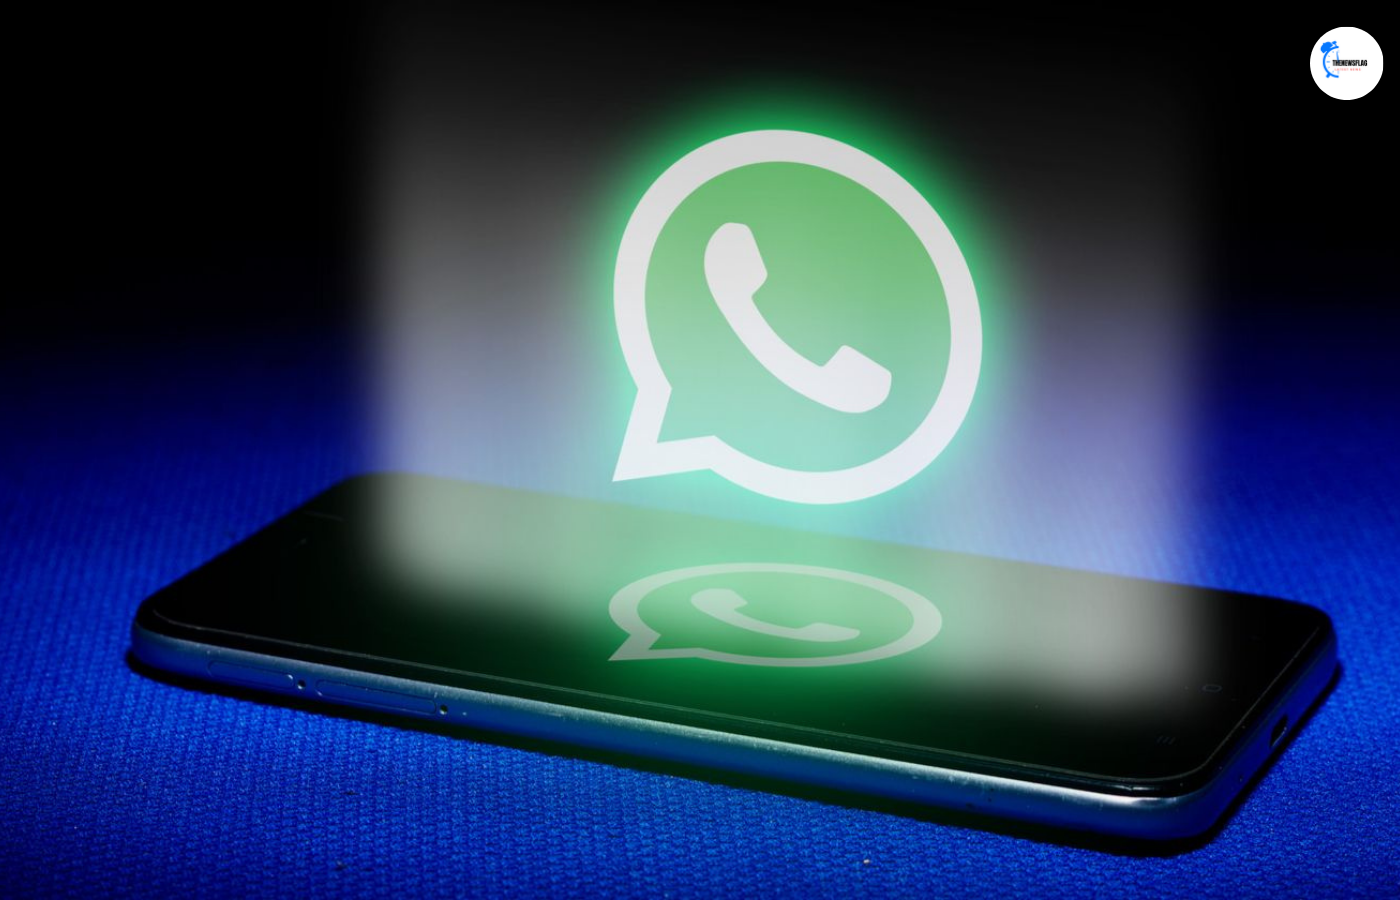 WhatsApp rolls out a new feature to detect end-to-end encrypted conversations 